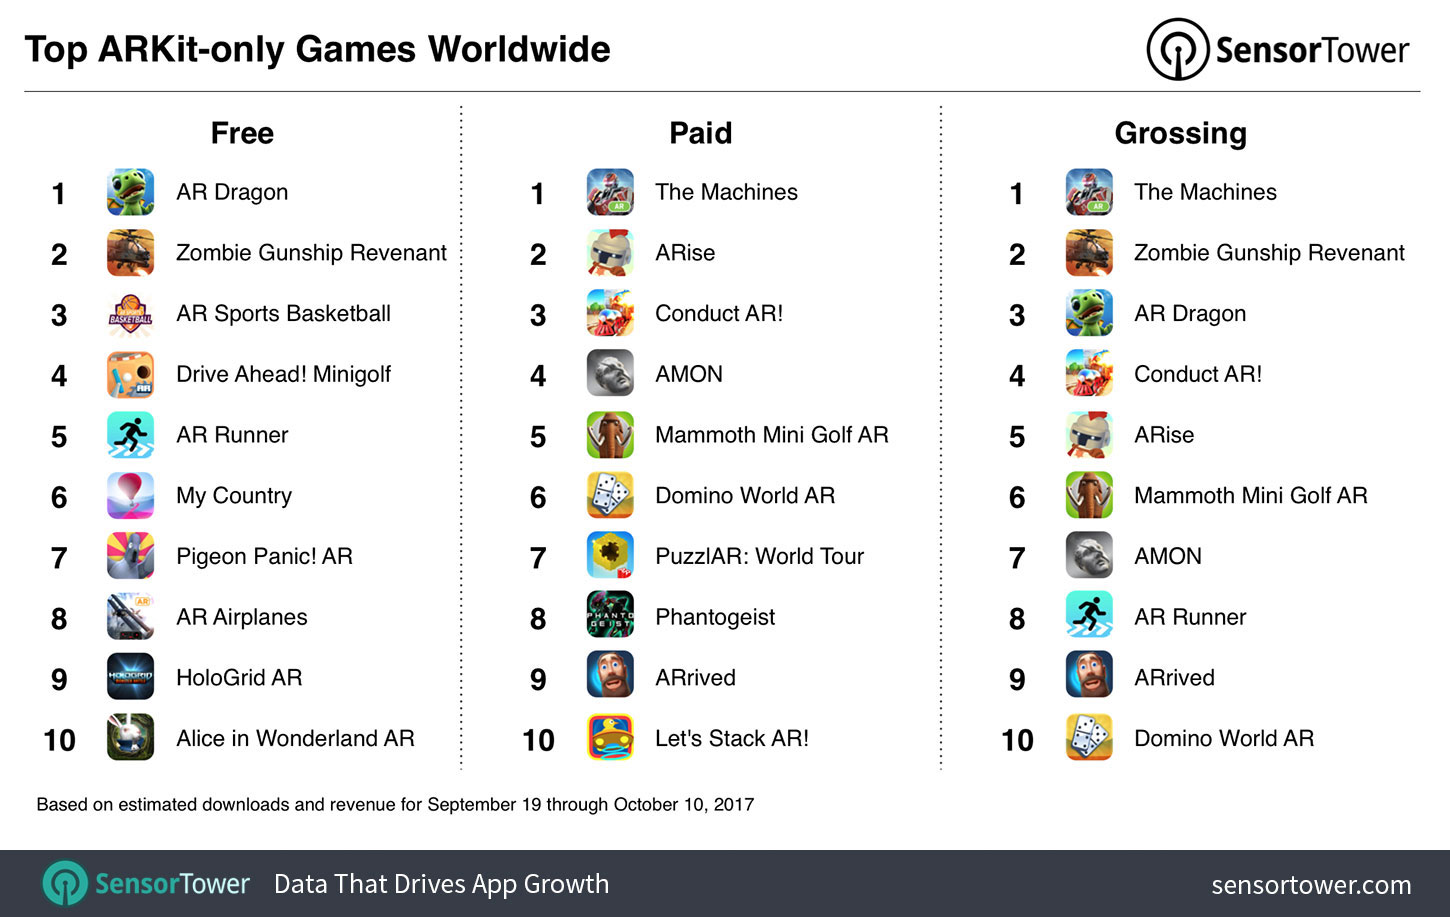 Ranking of top free, paid, and grossing ARKit games for September 19 to October 10, 2017